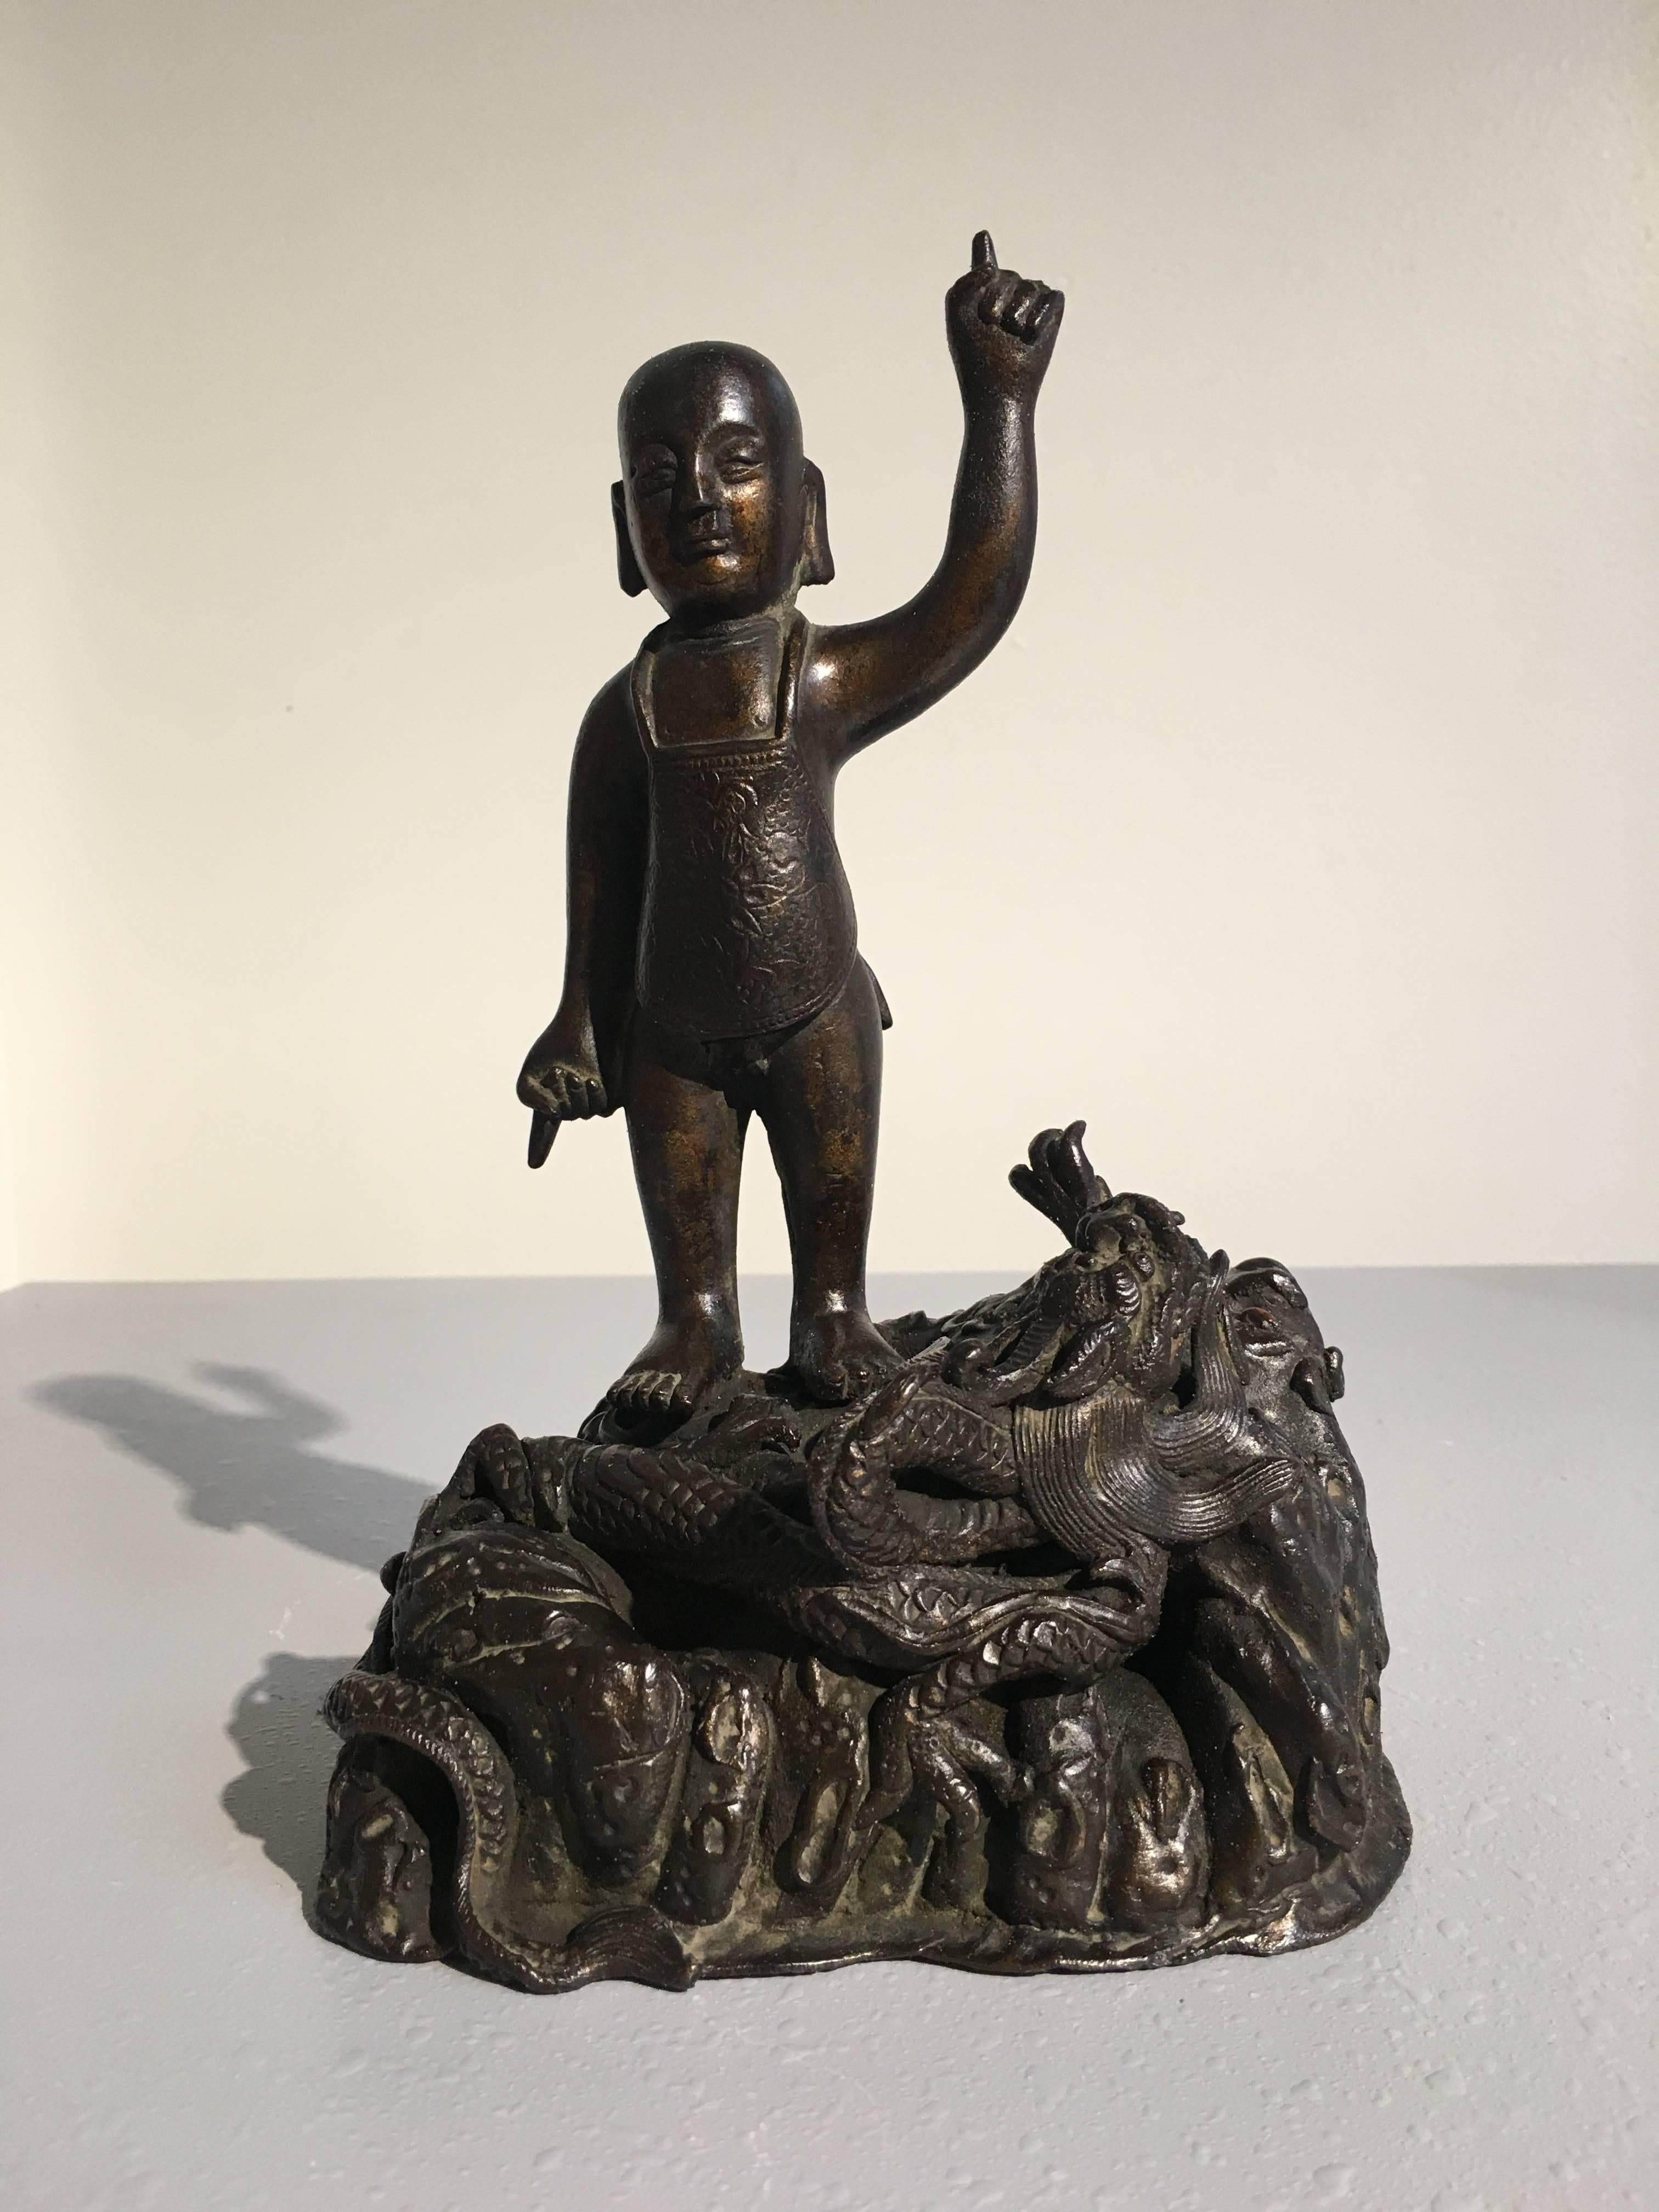 A rare and unusual Chinese Ming Dynasty bronze figure of the Buddha as an infant. The young Prince Siddhartha, who would grow up to become the Buddha, is portrayed standing, one hand pointing to the sky, the other to the ground. He is naked, save